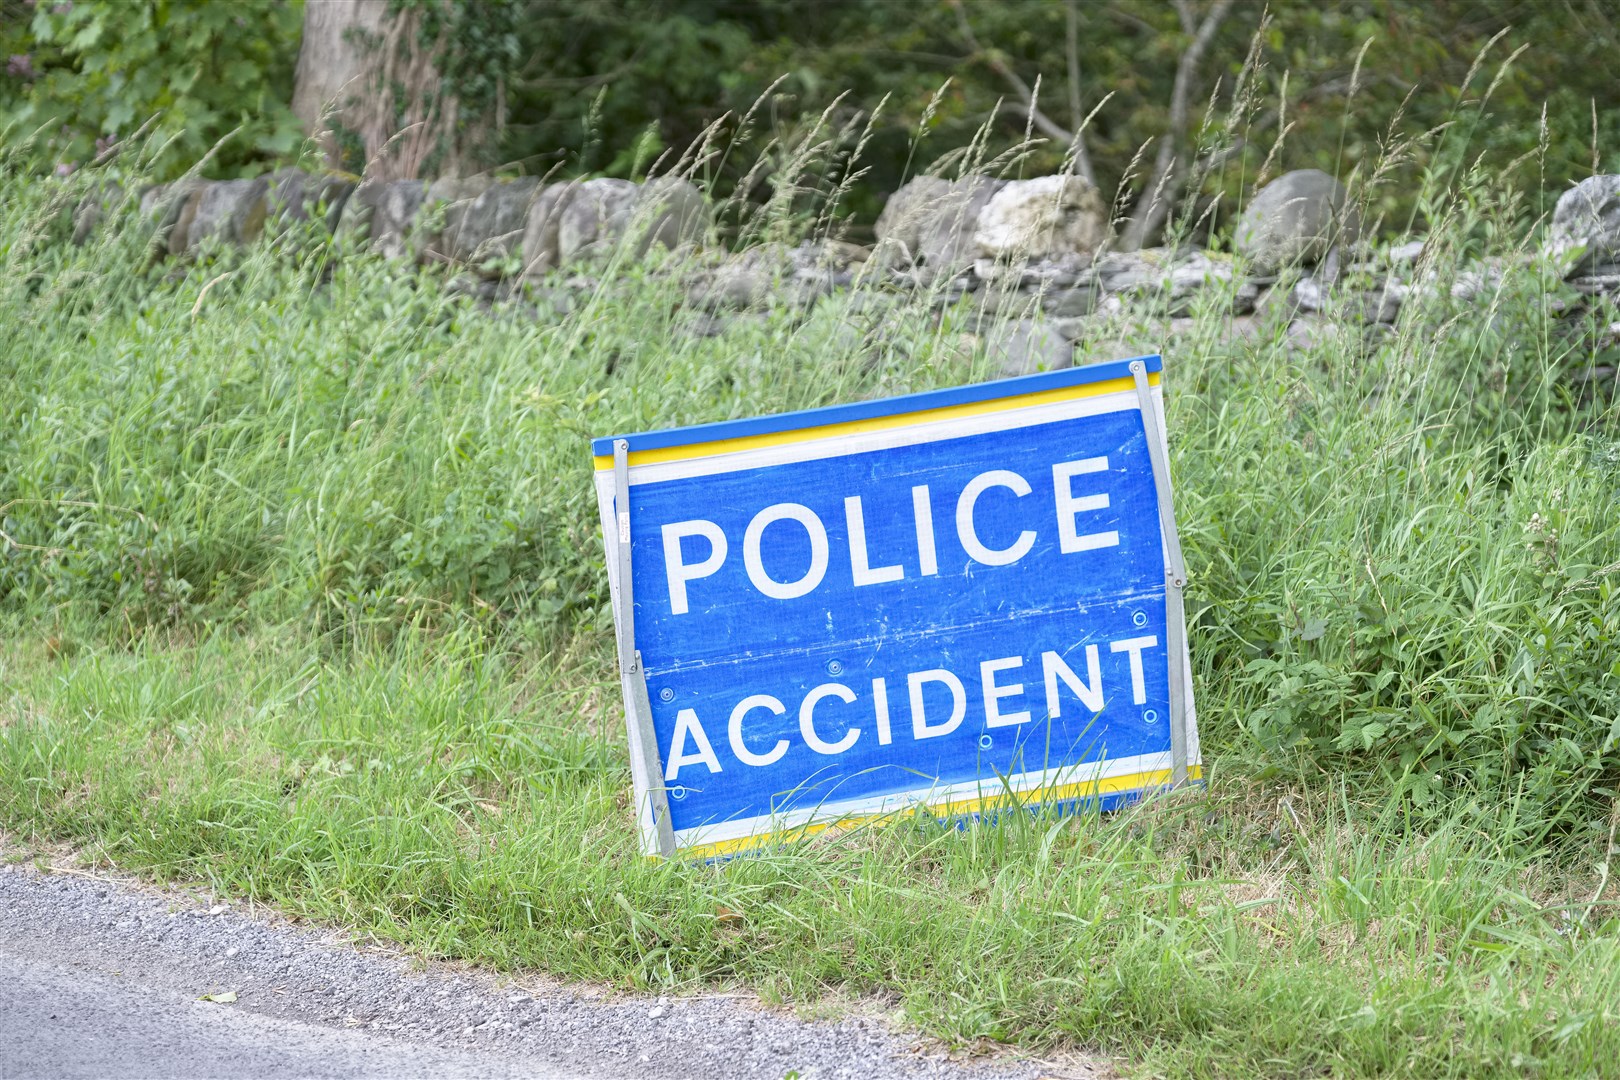 Police accident sign.